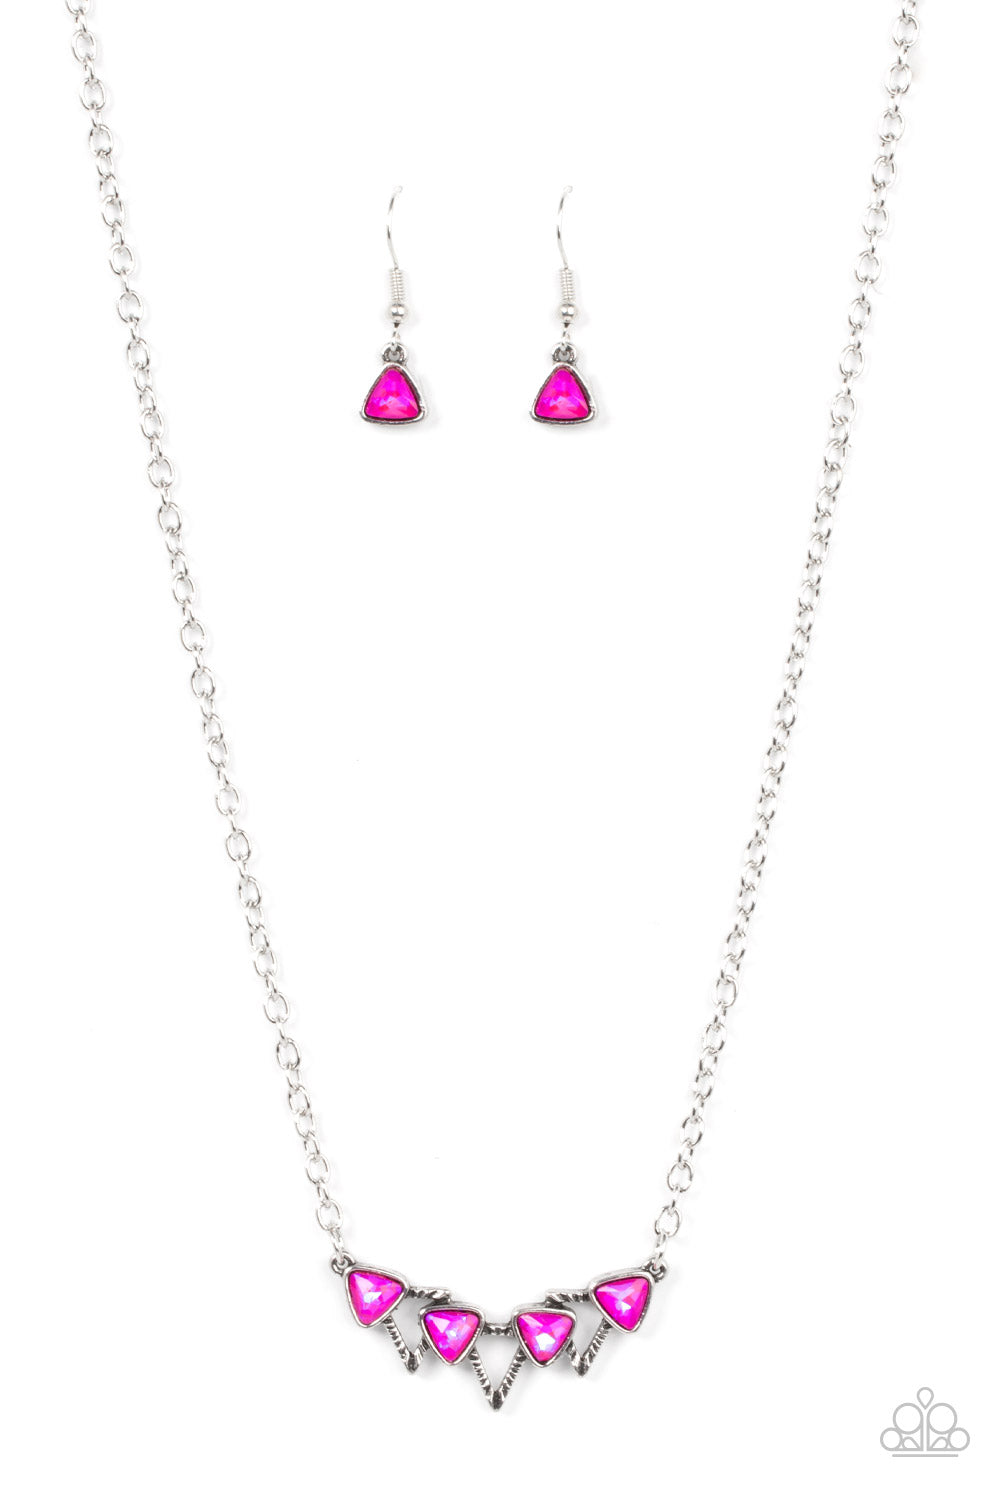 Pyramid Prowl - Pink Iridescent Necklace - Paparazzi Accessories